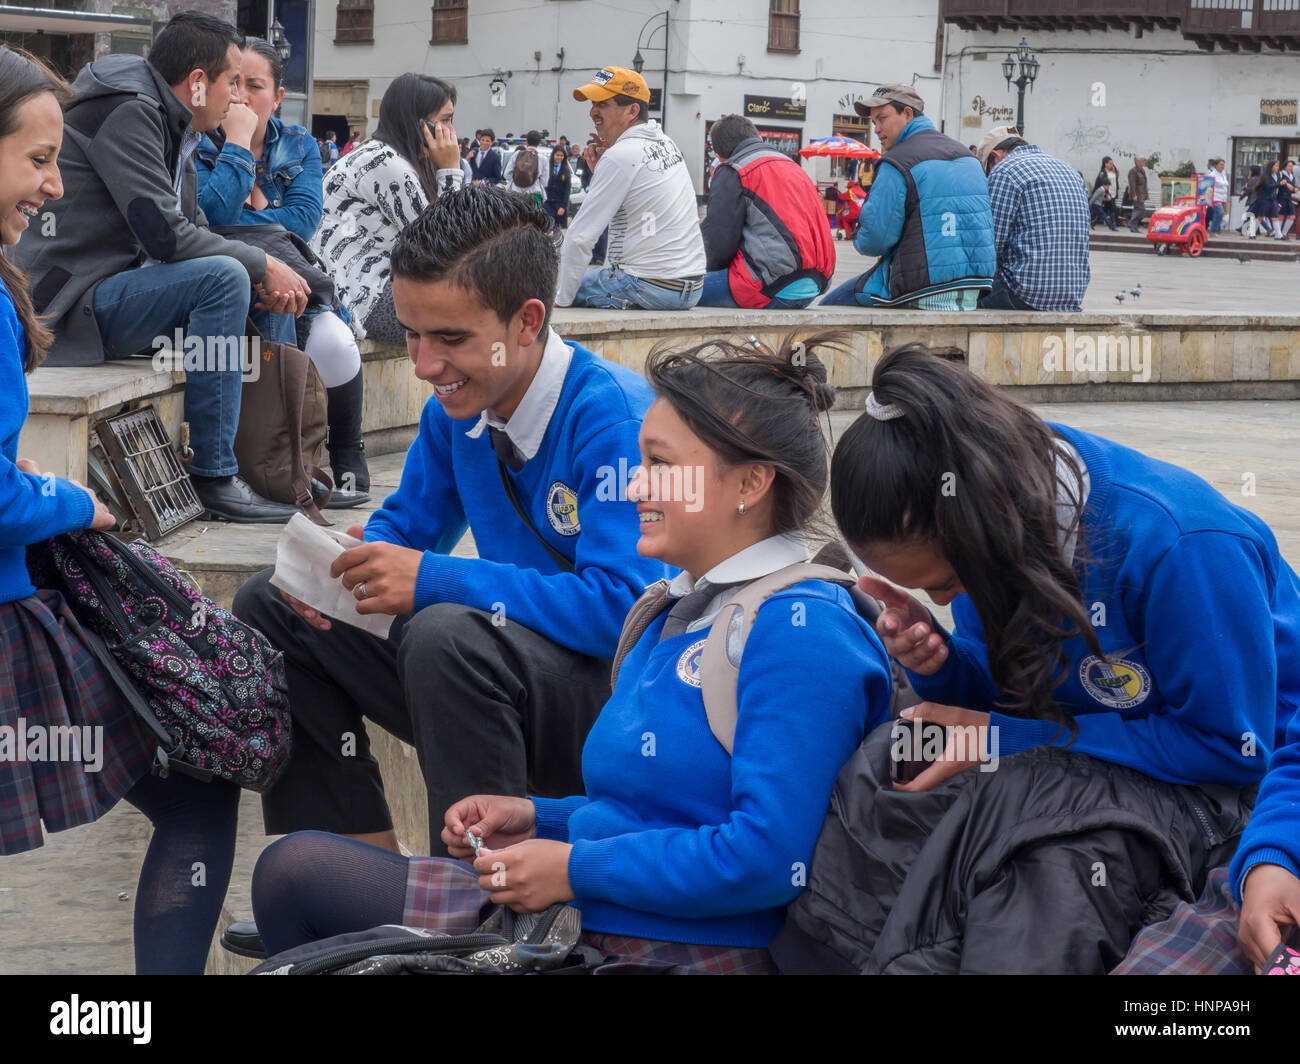 Tunja, Colombia - May 02, 2016: Children from the school wearing the uniforms walking  on the street of the town. Stock Photo